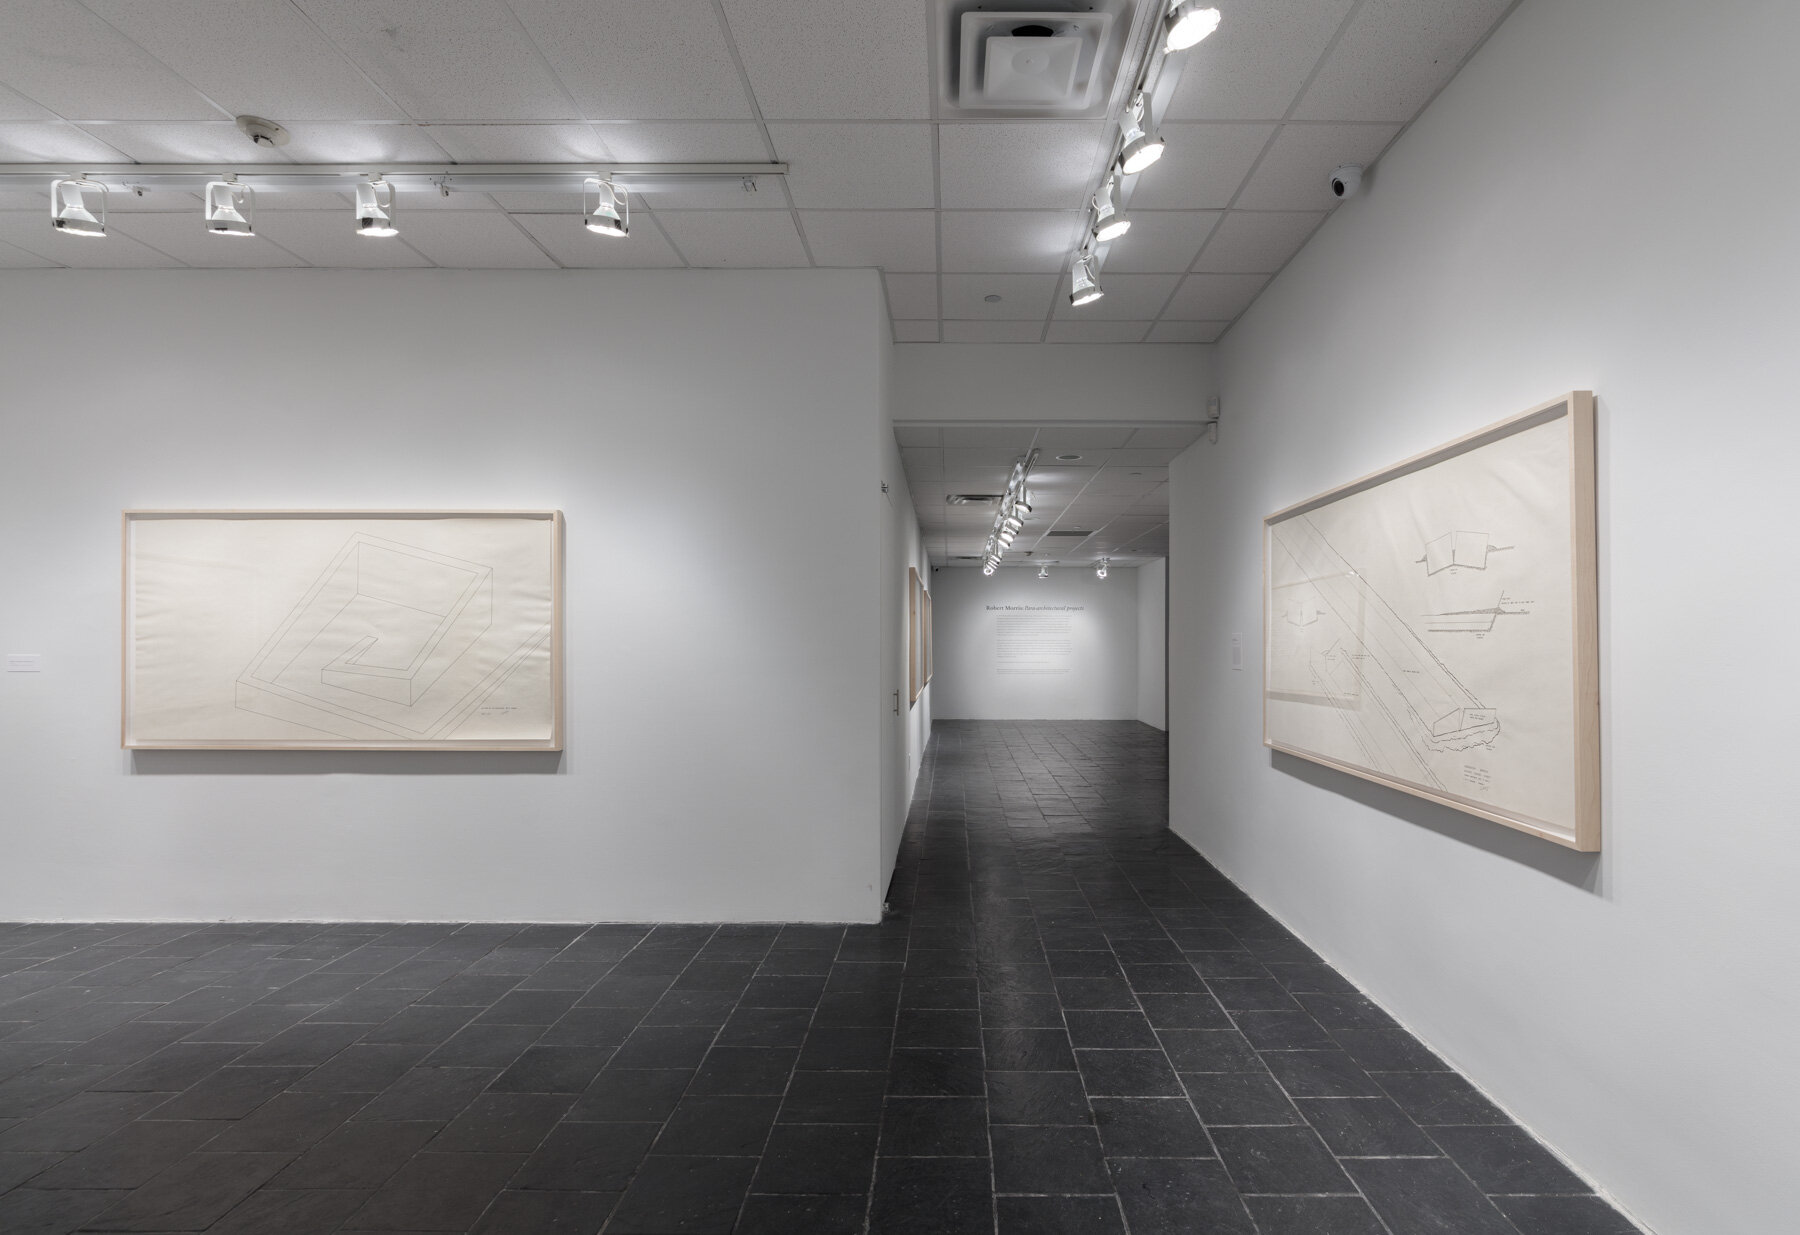  Installation view:  Robert Morris: Para-architectural projects , Hunter College Art Galleries, 2019. © 2019 The Estate of Robert Morris / Artists Rights Society (ARS), New York. Photo: Stan Narte 